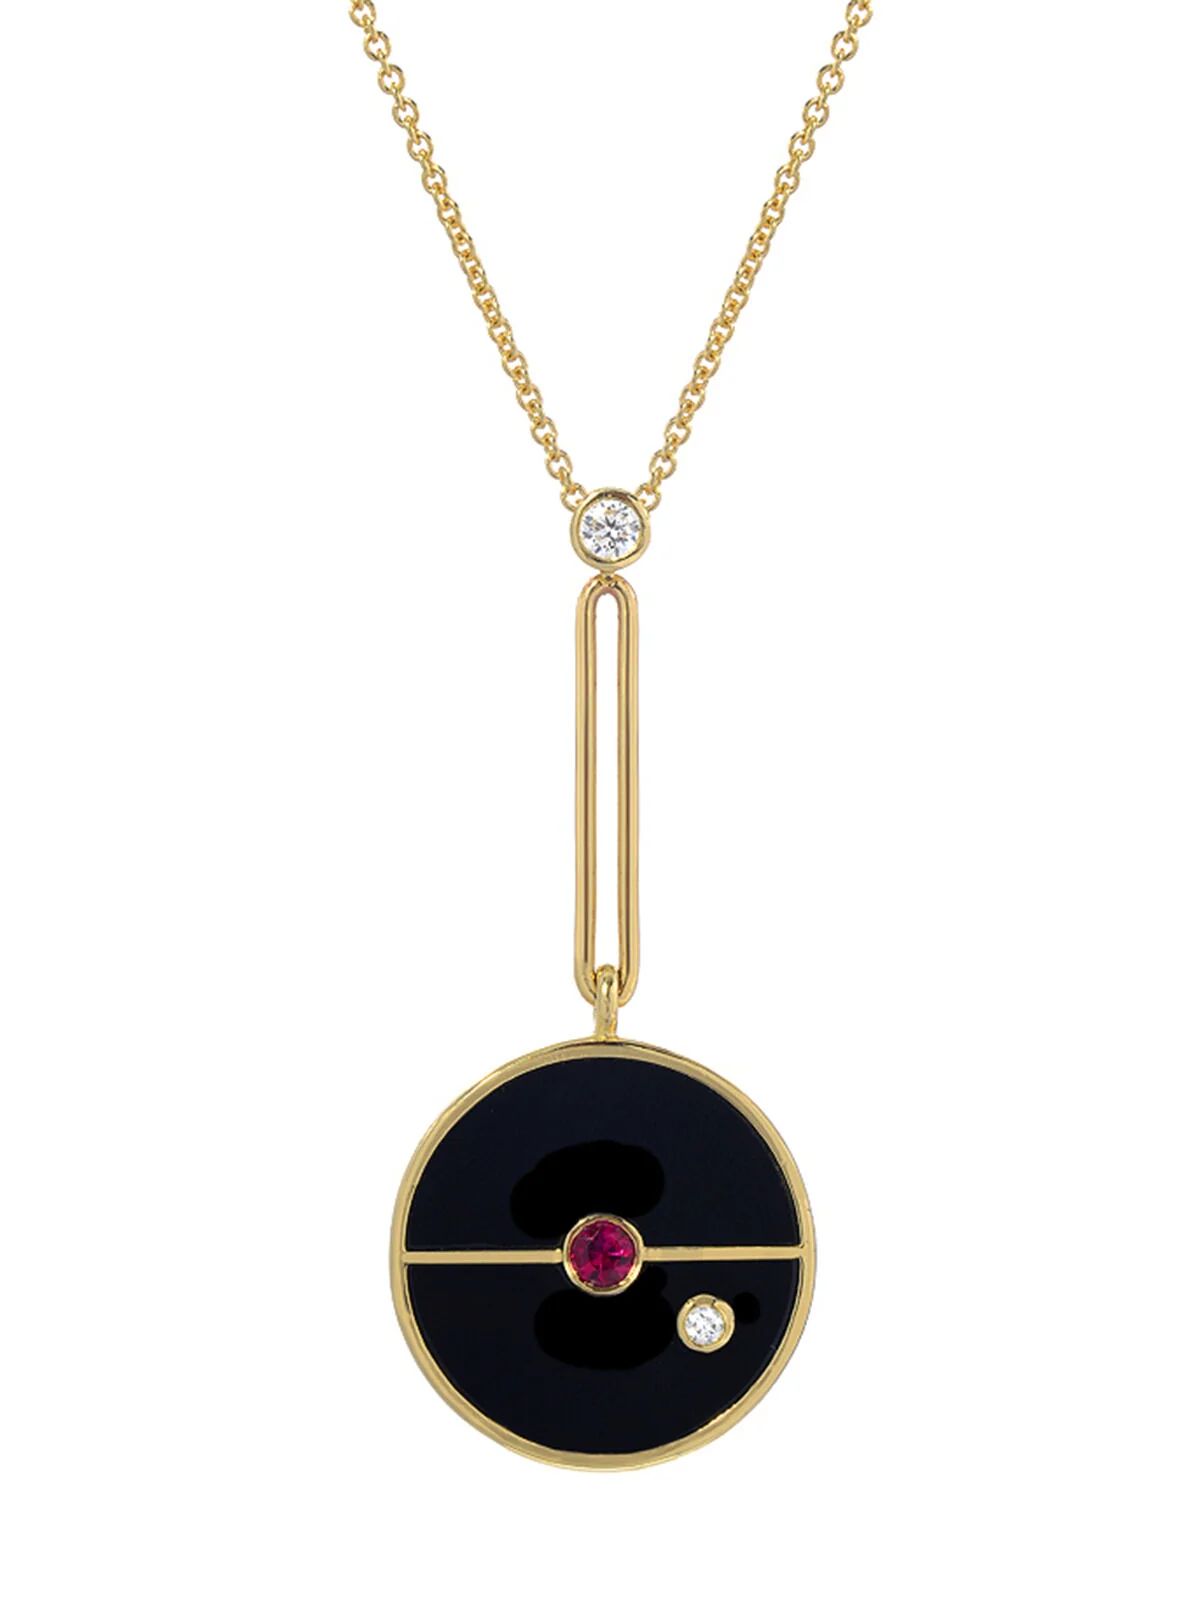 Signature Black Onyx and Ruby Compass Yellow Gold Pendant Necklace | YLANG 23